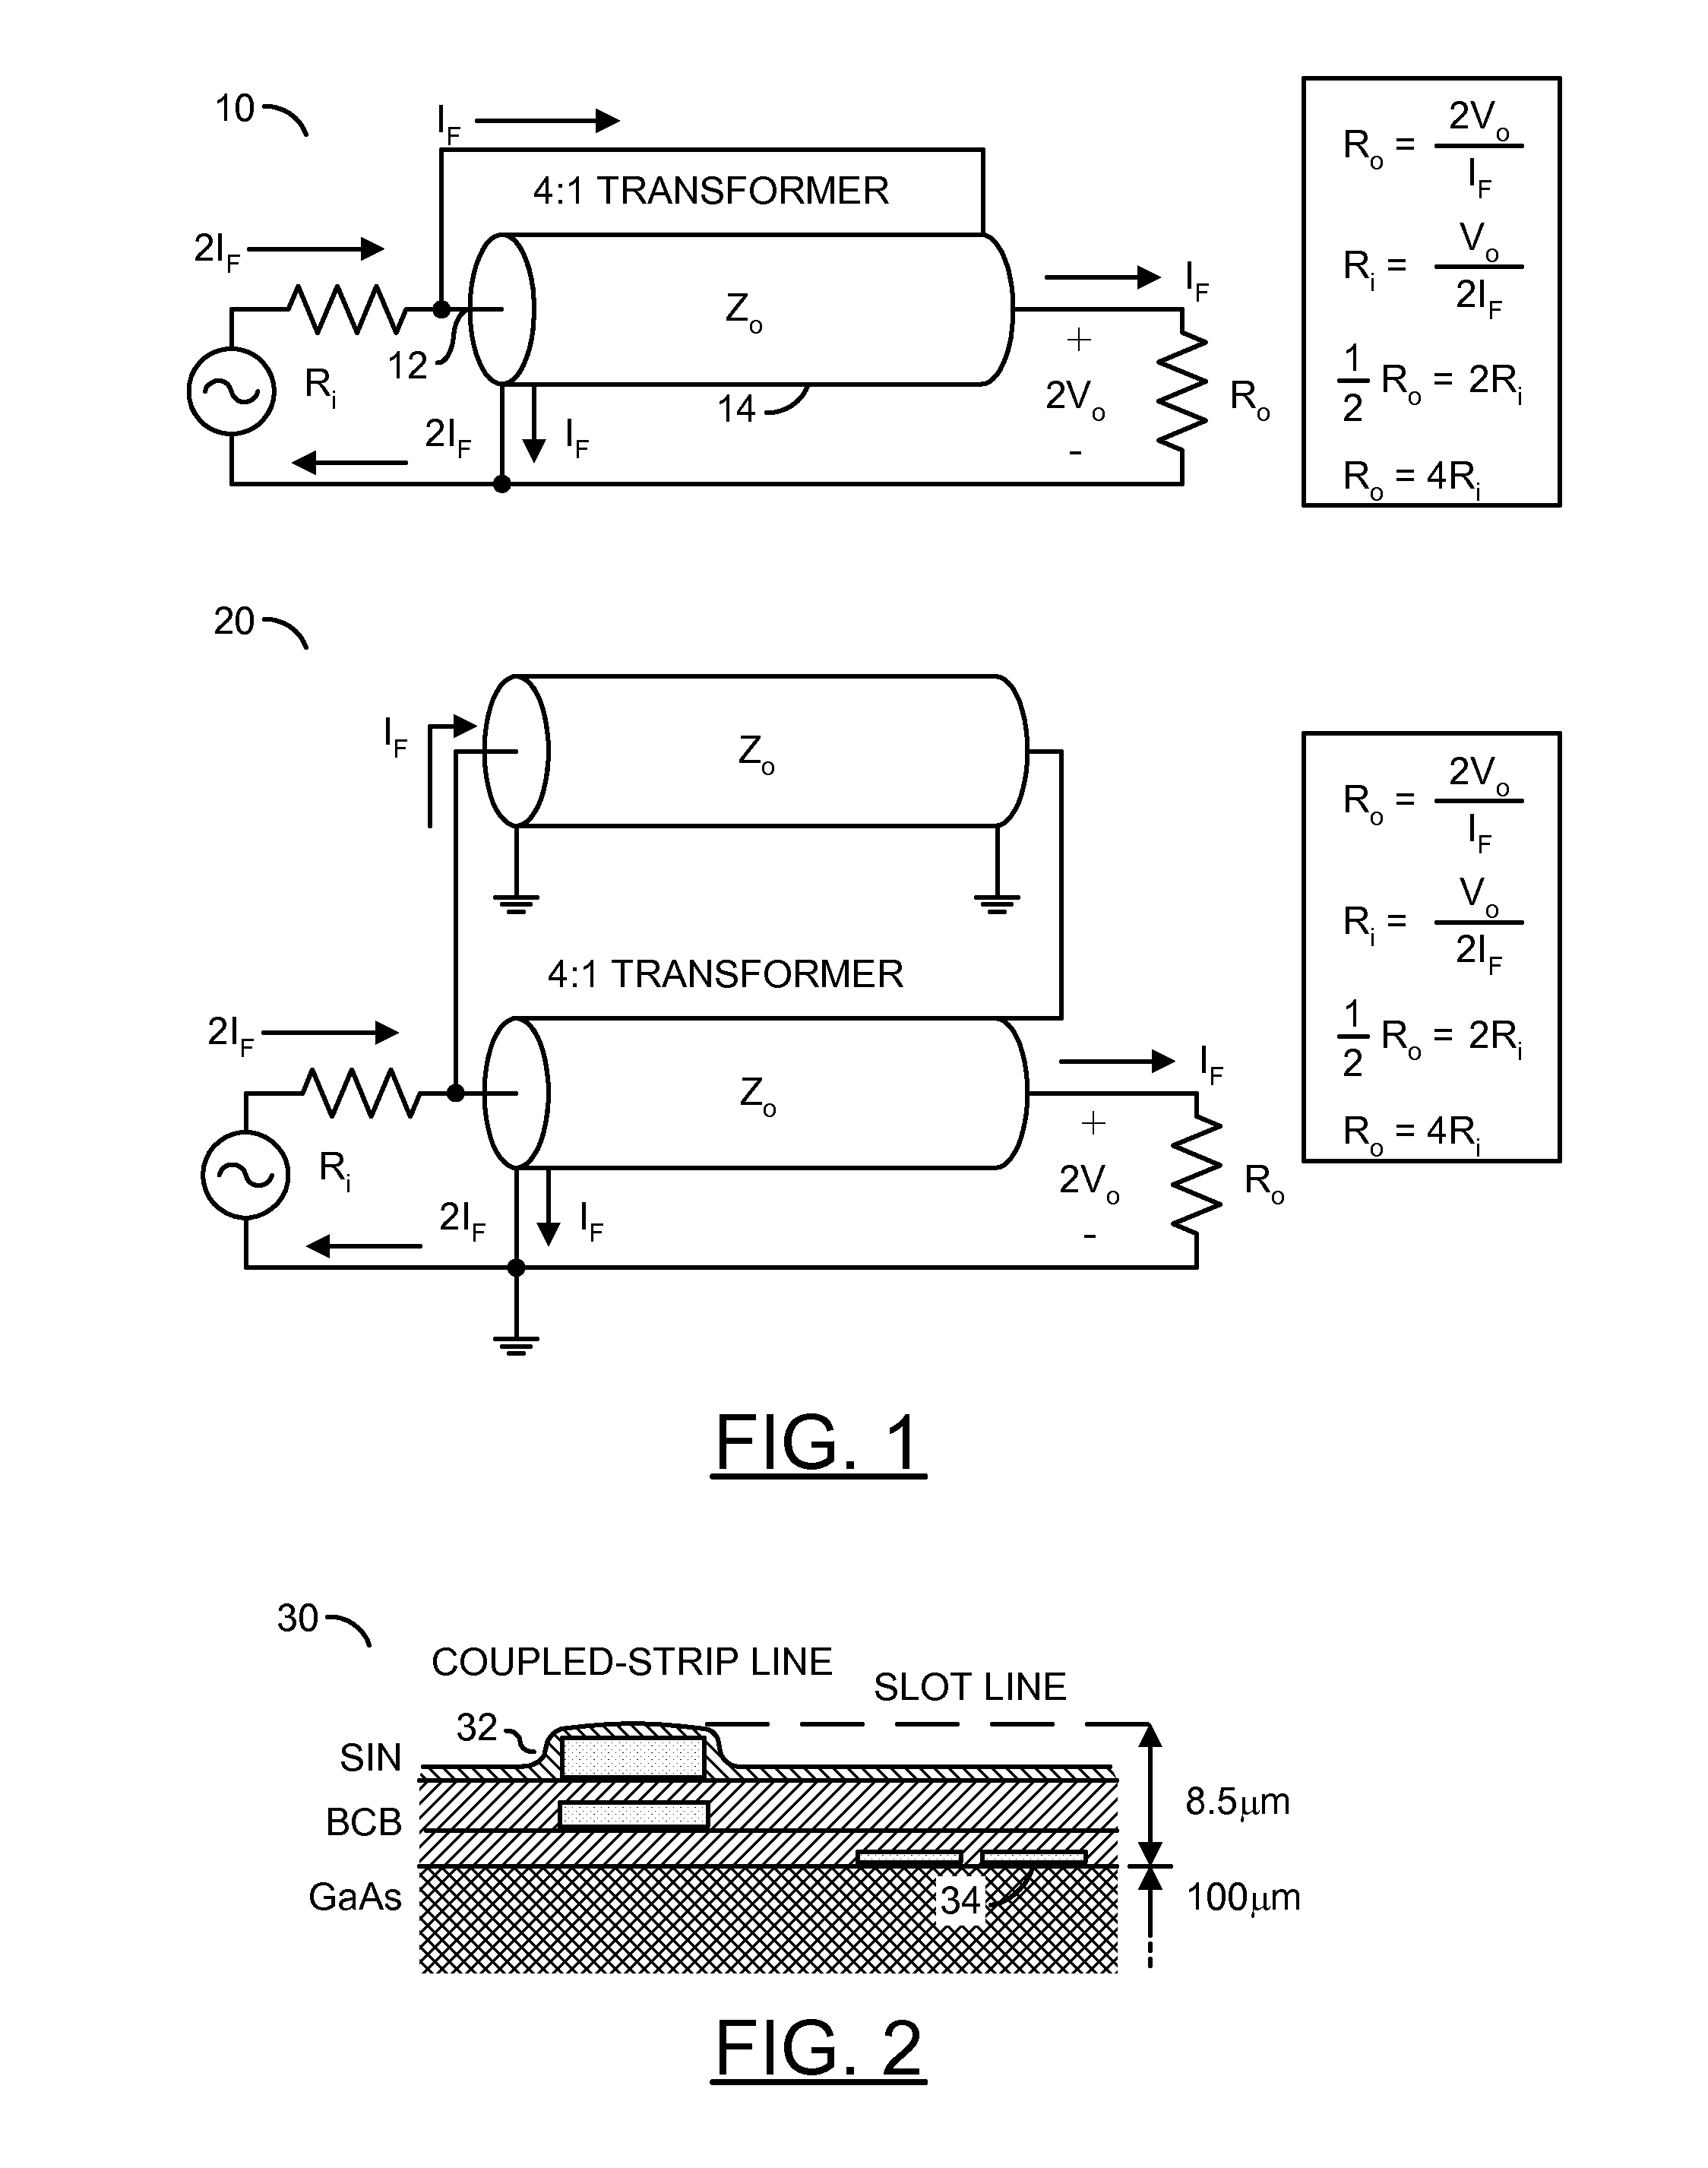 Broadside-coupled transformers with improved bandwidth